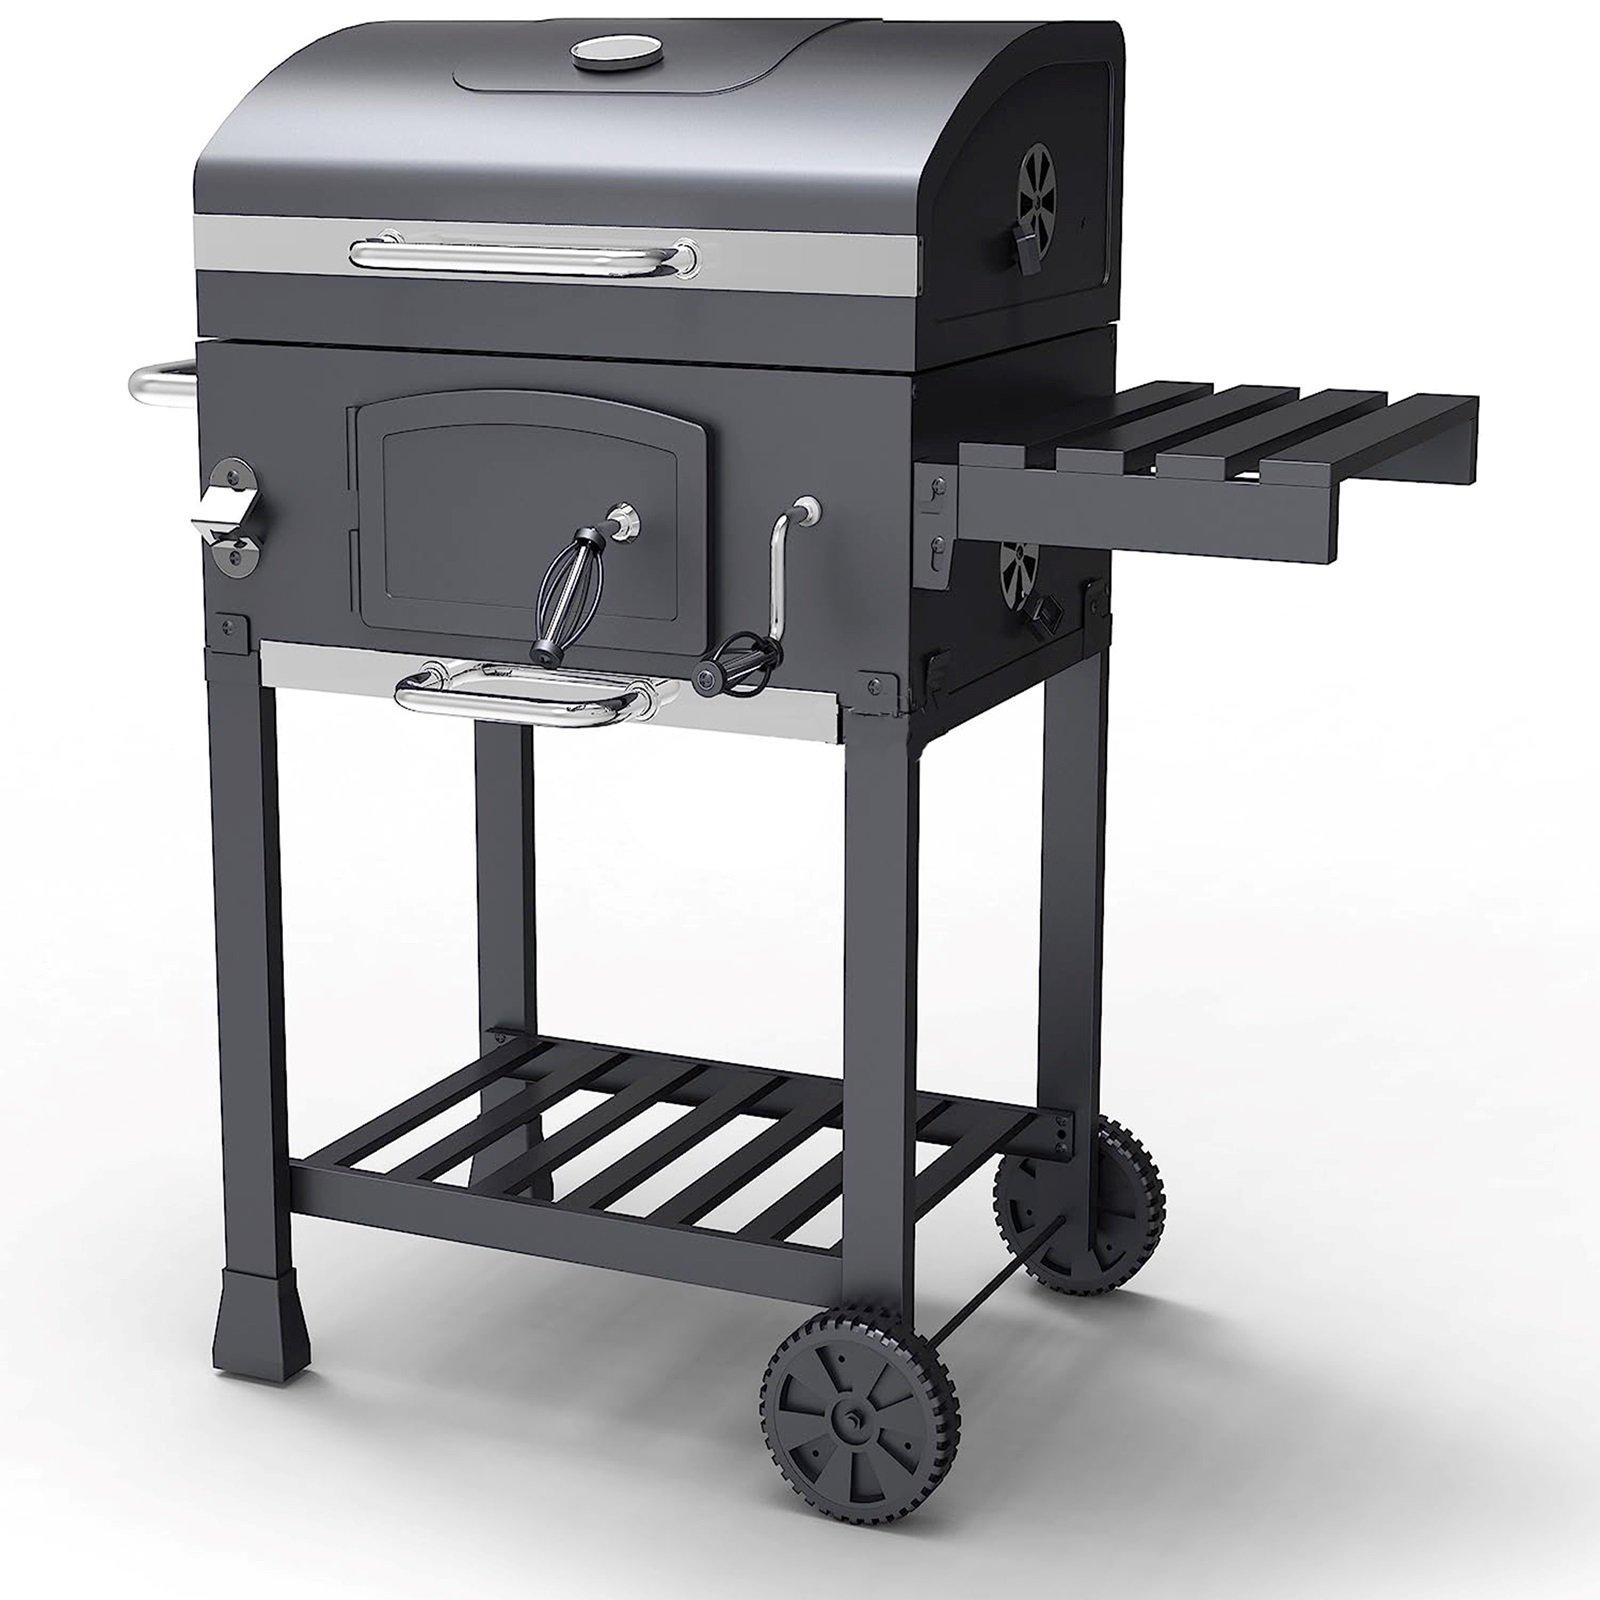 Large Rectangular Adjustable Charcoal BBQ Grill Garden Barbecue